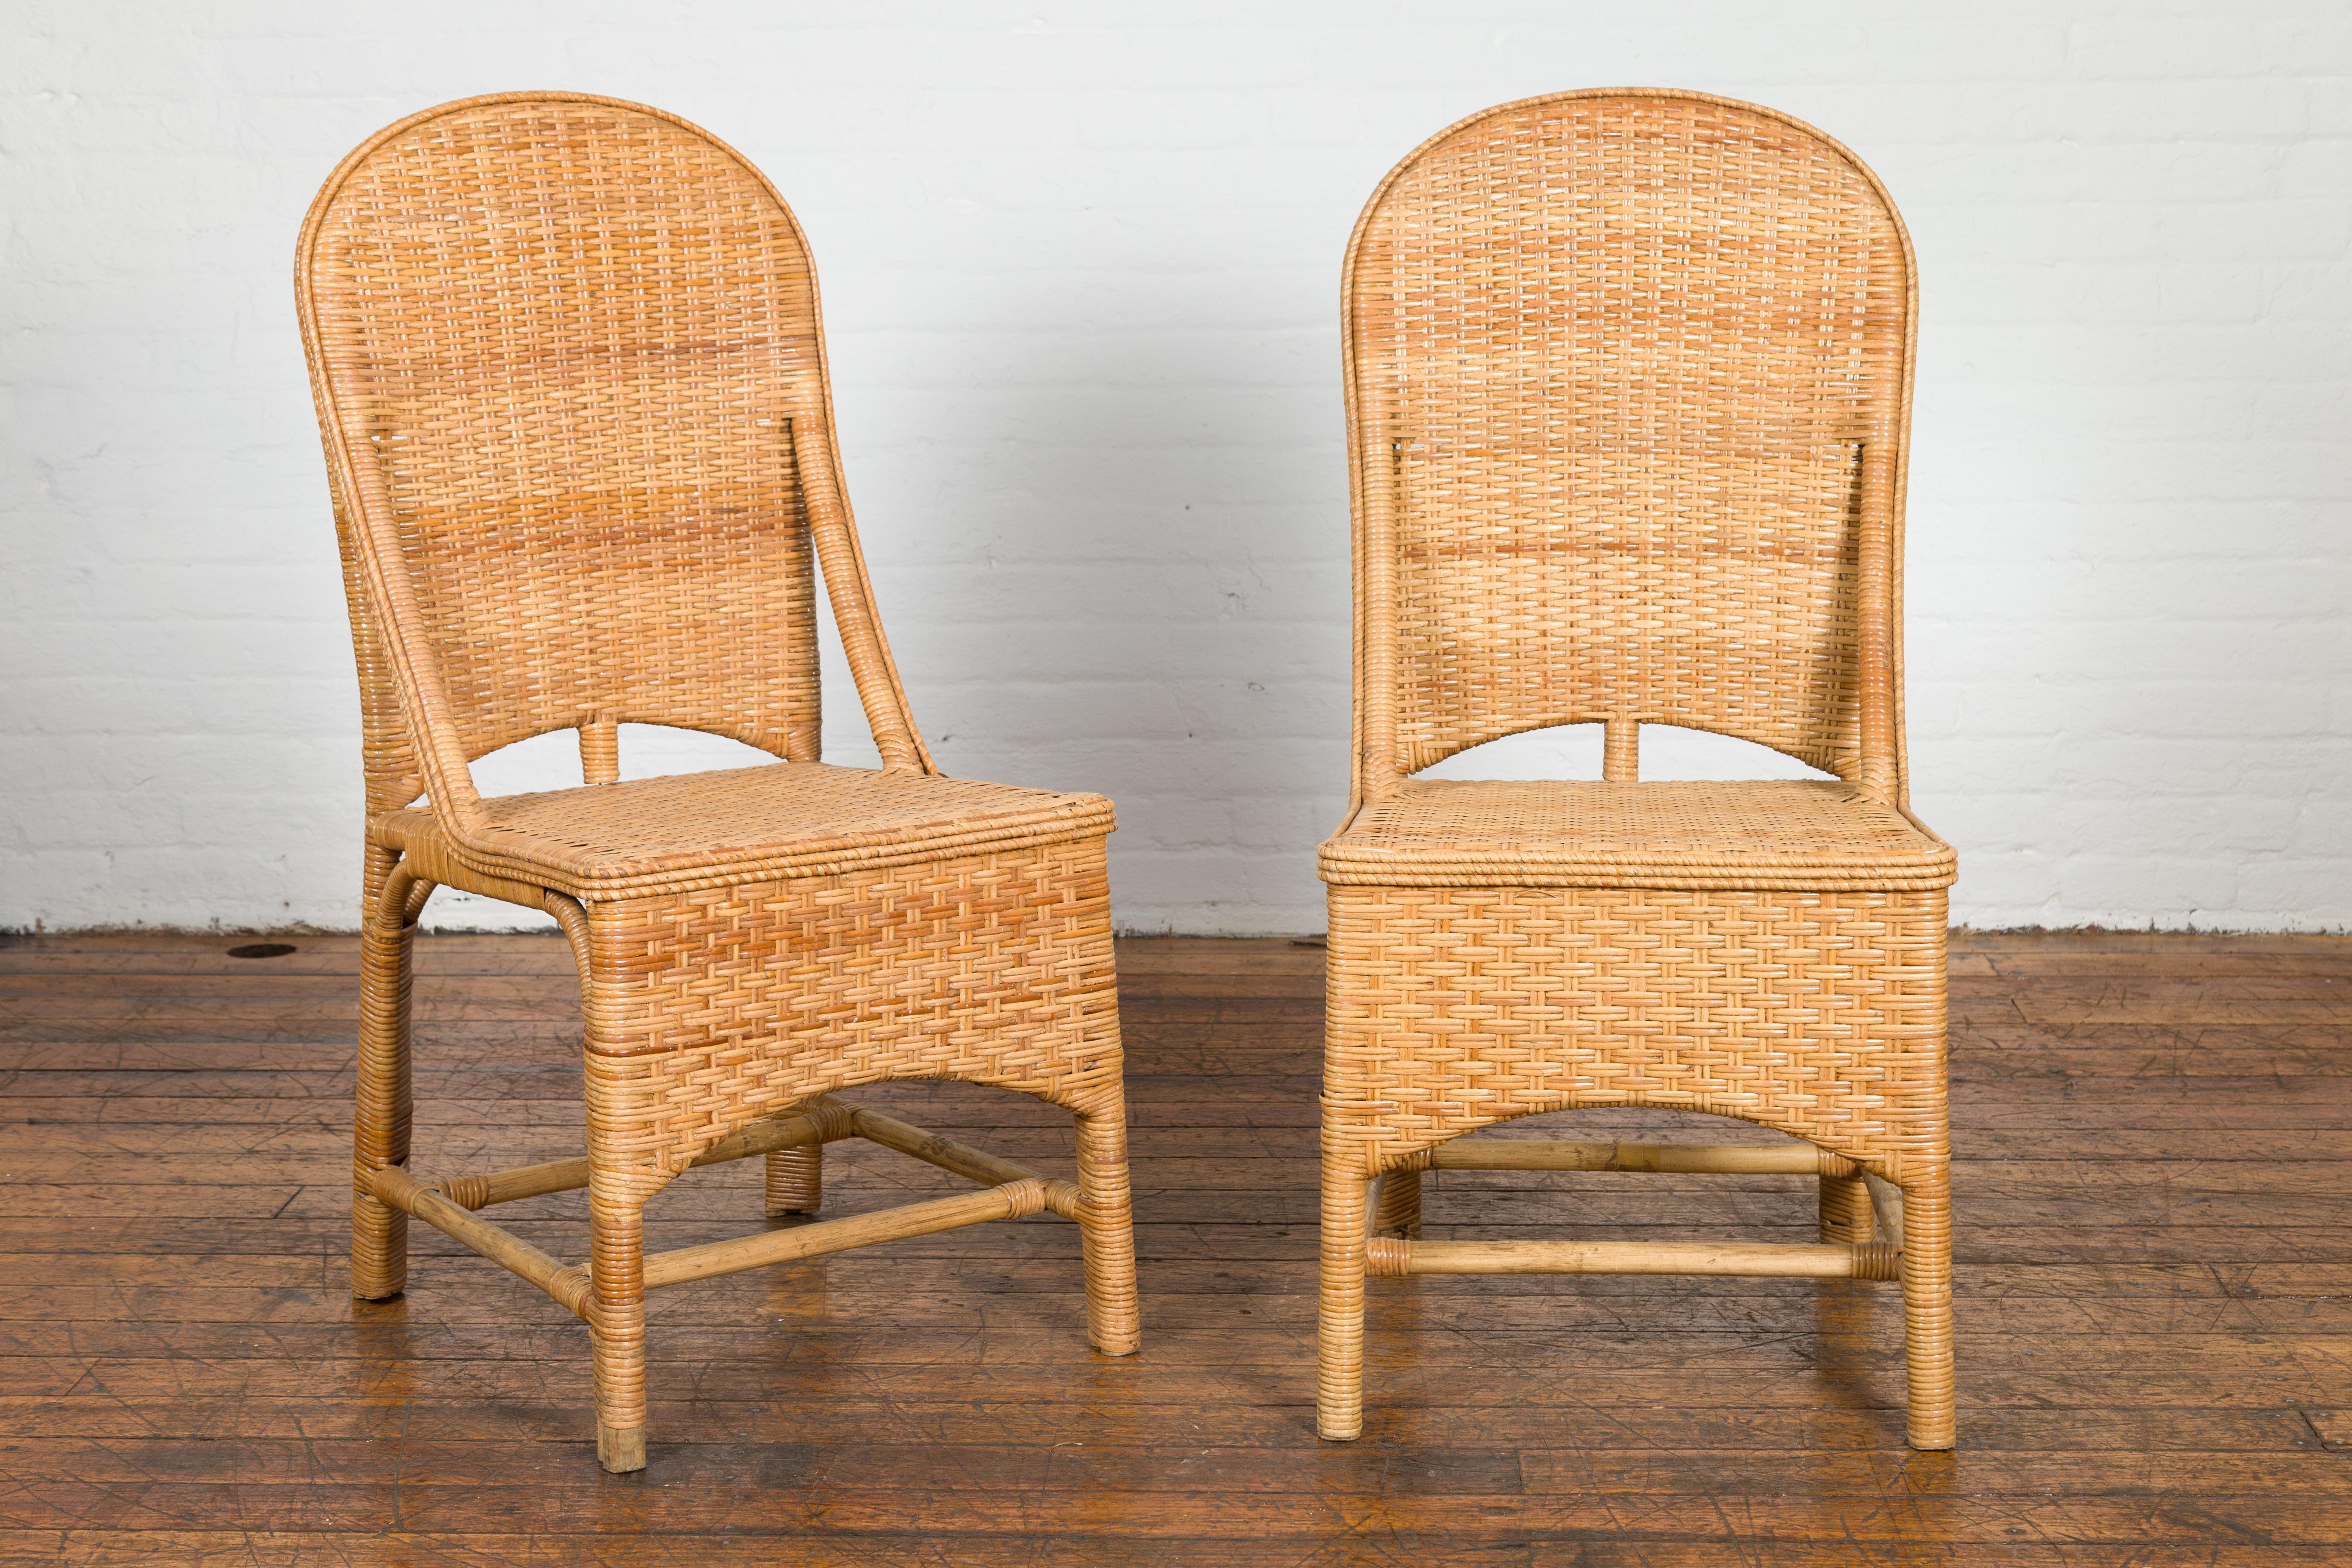 A pair of vintage Country style hand woven rattan chairs from the mid 20th century, with arching backs and double H-Form cross stretchers. Embrace a fusion of functionality and earthy aesthetics with these vintage, mid-20th-century rattan chairs.